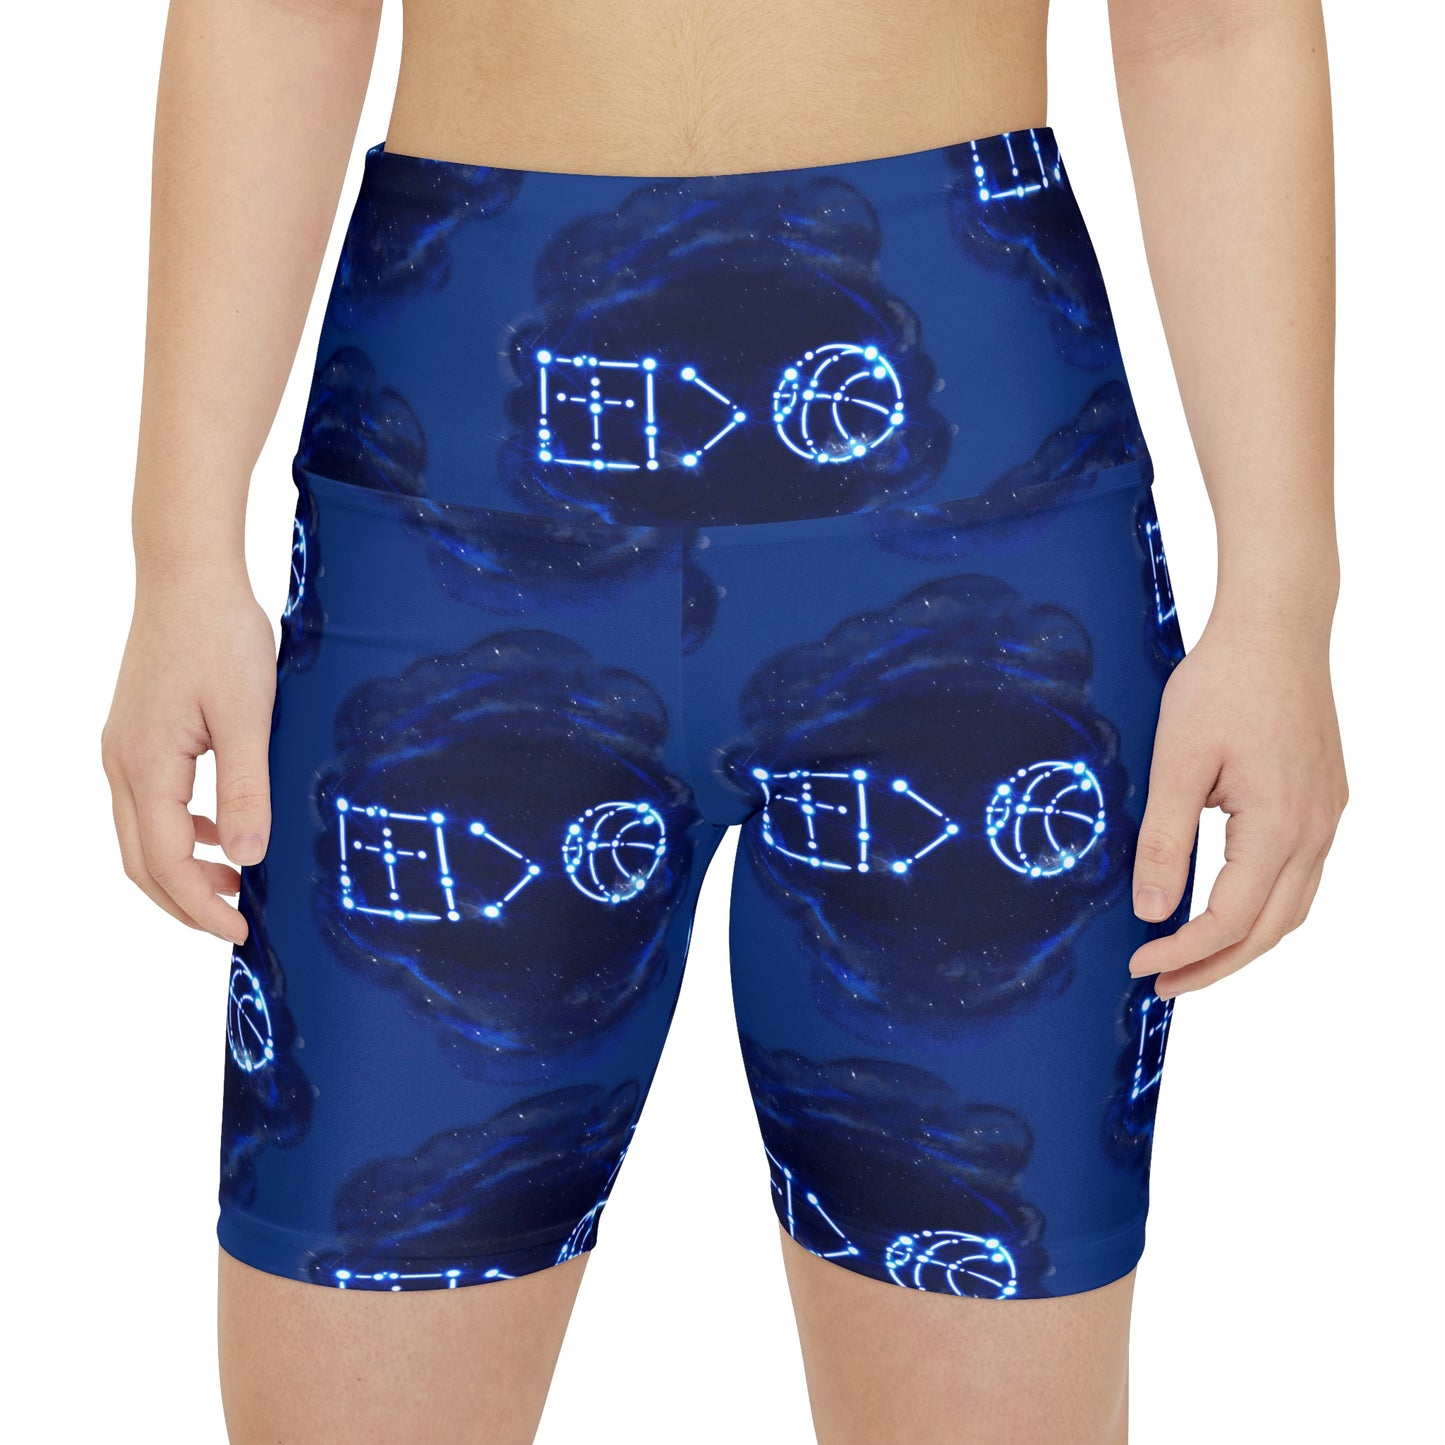 Art Collection Starry Nights Women's Workout Shorts